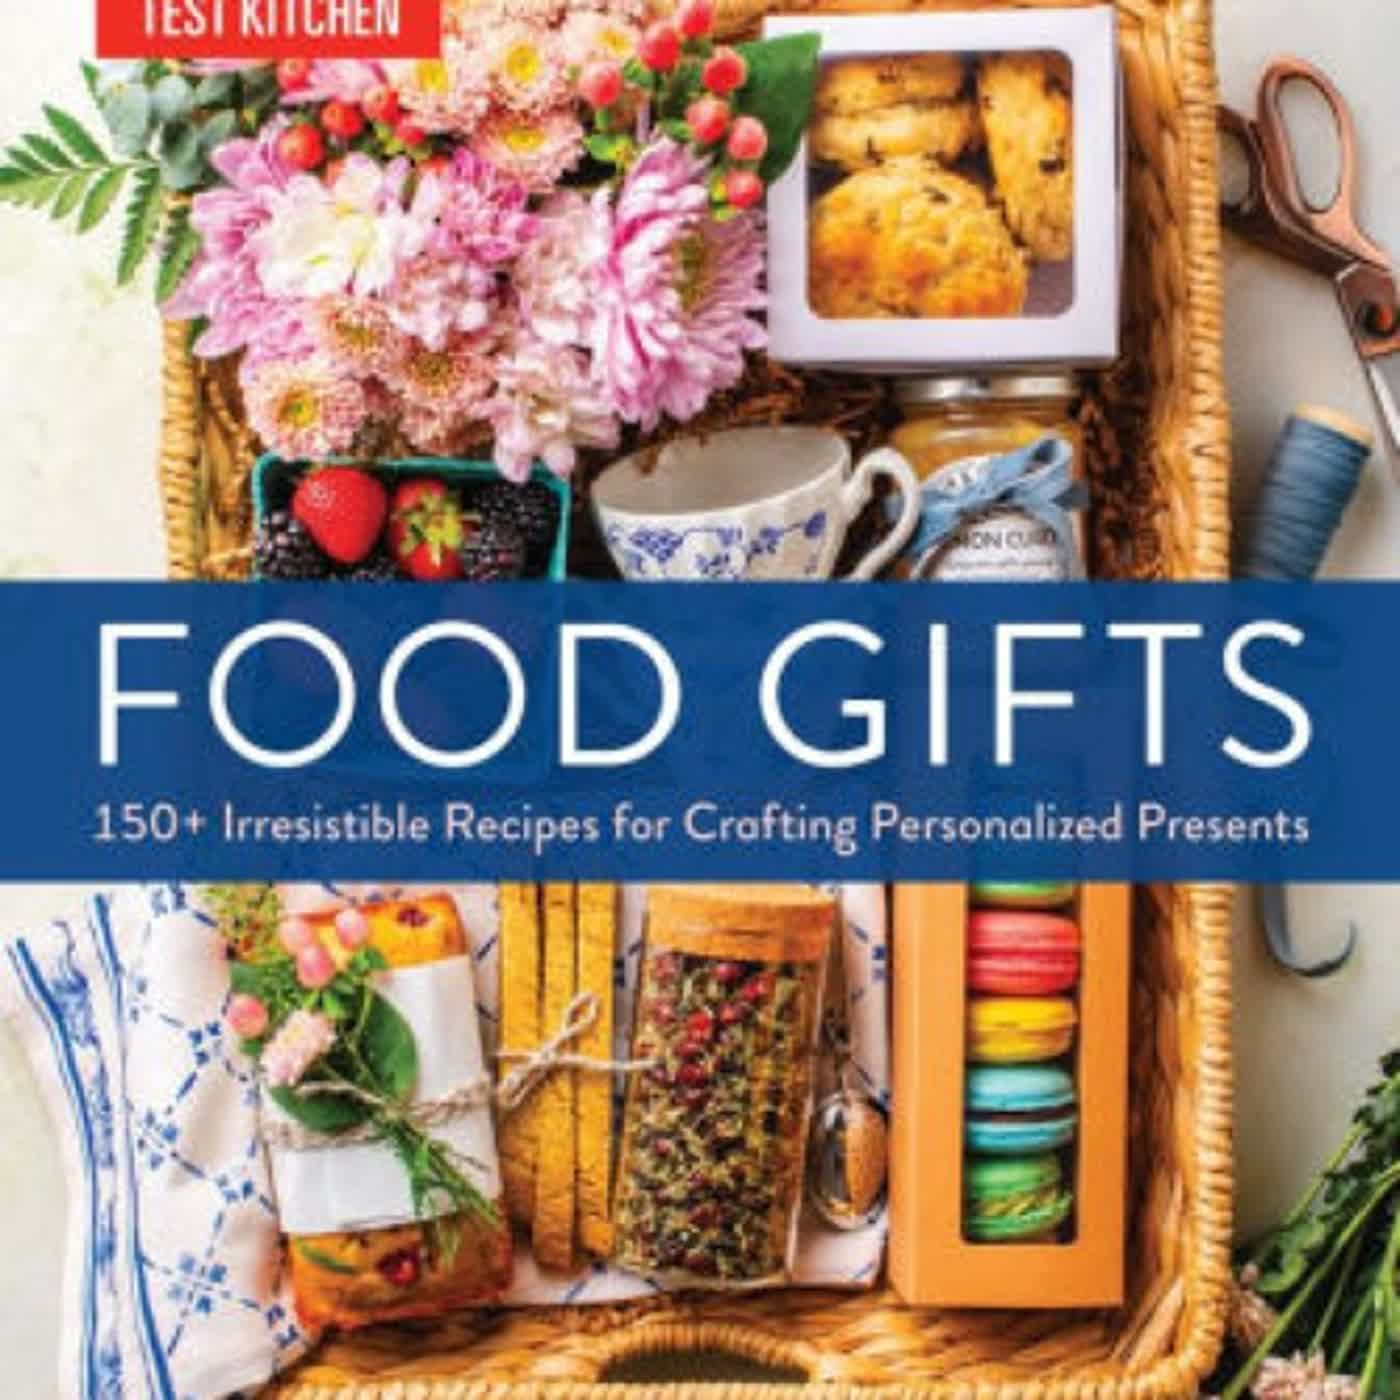 Food Gifts: 150+ Irresistible Recipes for Crafting Personalized Presents by America's Test Kitchen, Elle Simone Scott on Iphone New Format